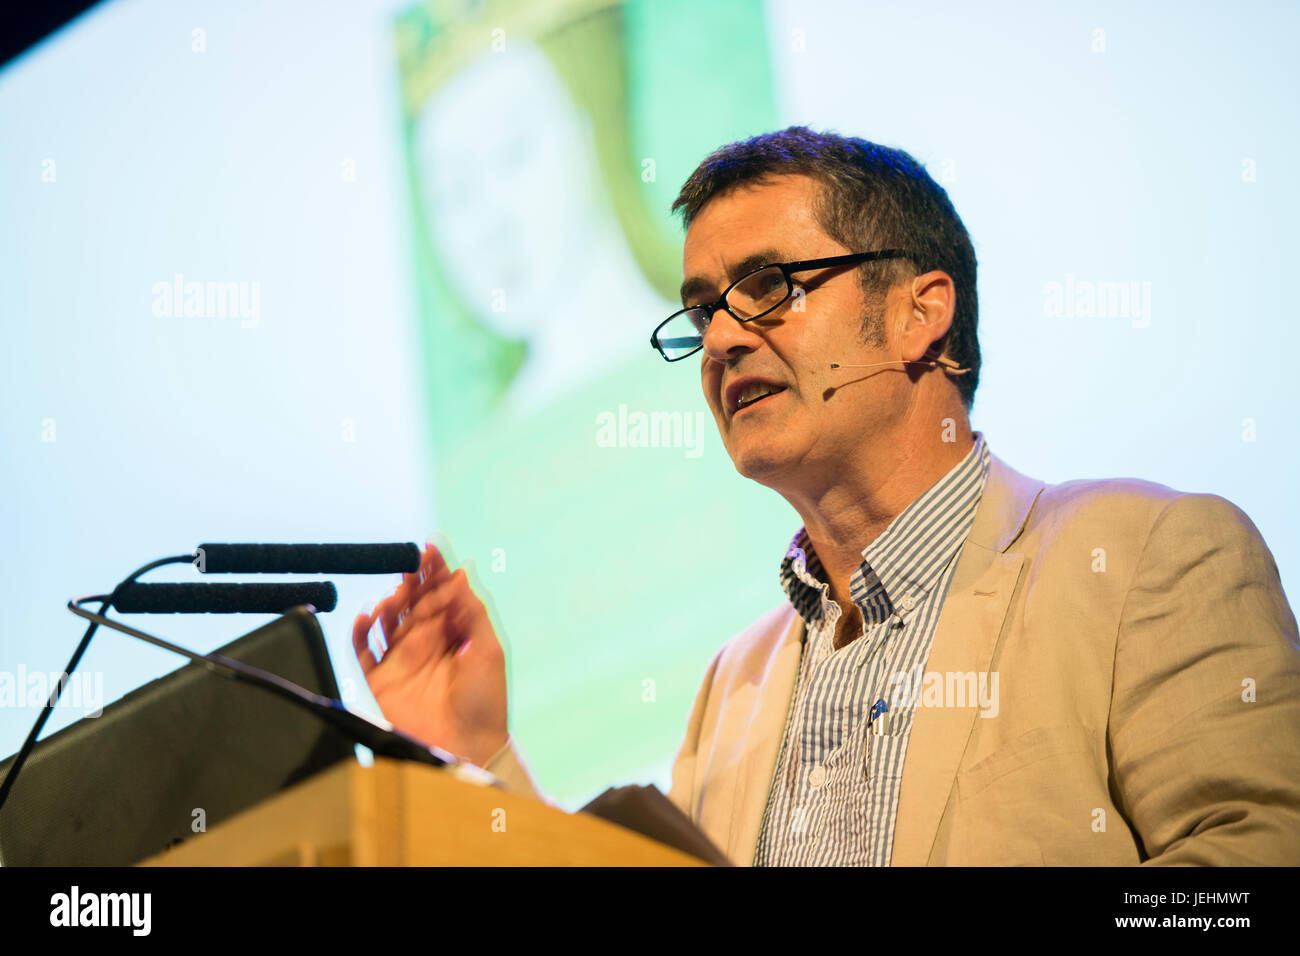 Giles Tremlett , journalist, author and historian based in Madrid, Spain, who has spent most of his career writing for The Guardian and The Economist, talking about his book 'Isabella of Castile'  at the 2017 Hay Festival of Literature and the Arts, Hay on Wye, Wales UK Stock Photo